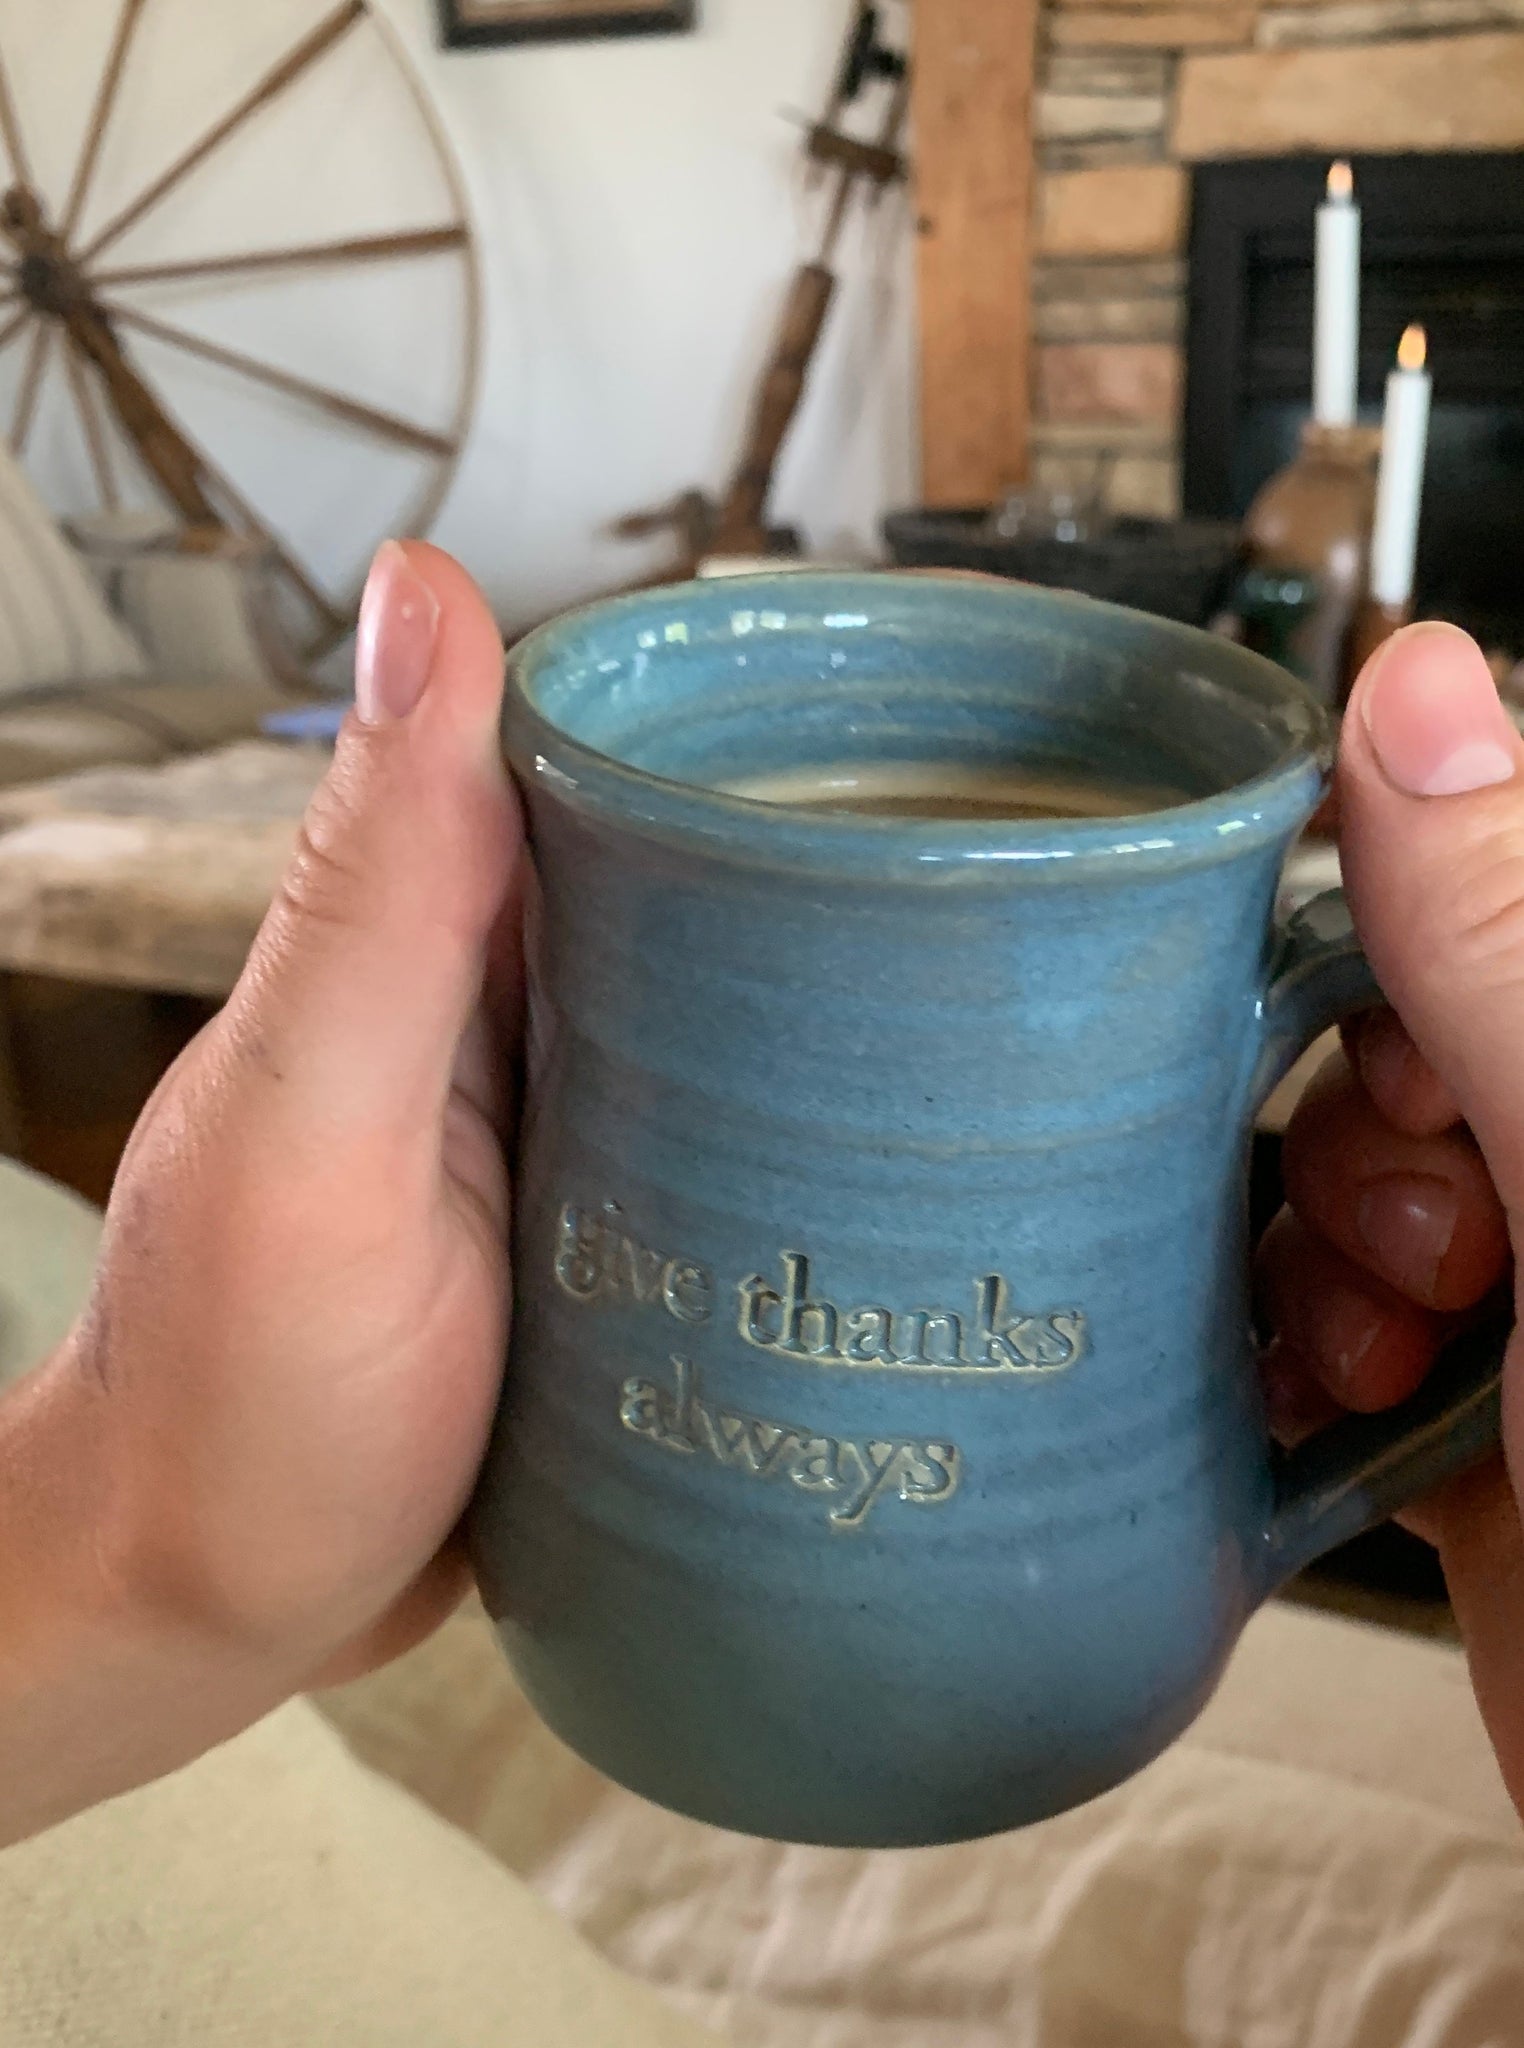 Three Gratitude Mugs with unique designs and glaze colors: "eucharisteo" with cloud blue glaze on white clay, "give thanks always" with darker blue glaze and ochre undertones, and "be still" with variegated gray glaze on red clay. Elegant shape, slight ripples, curved handles. Perfect for reflection and gifting.